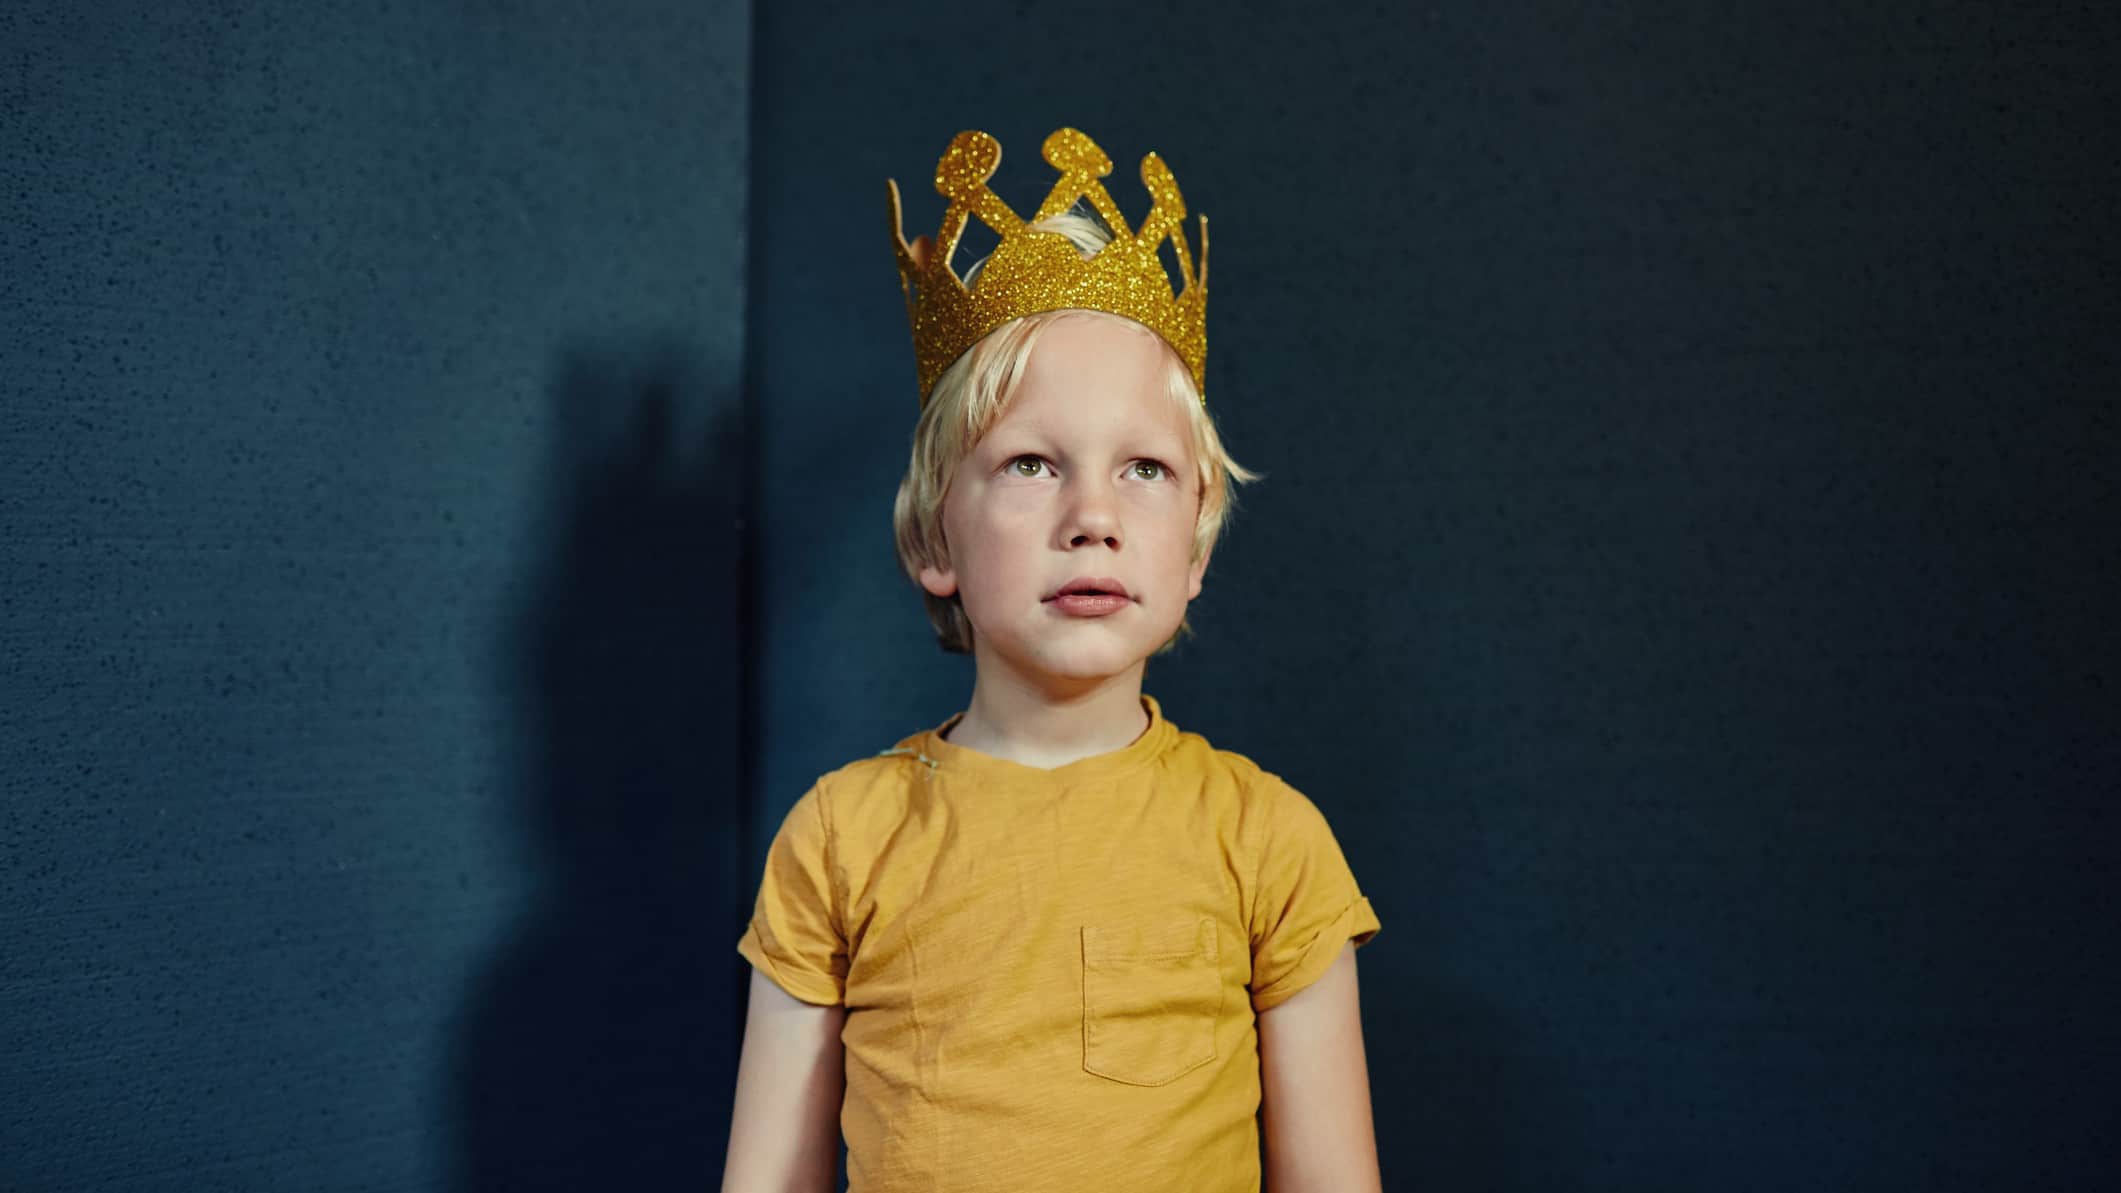 A boy with a gold crown stands stoically looking straight ahead.